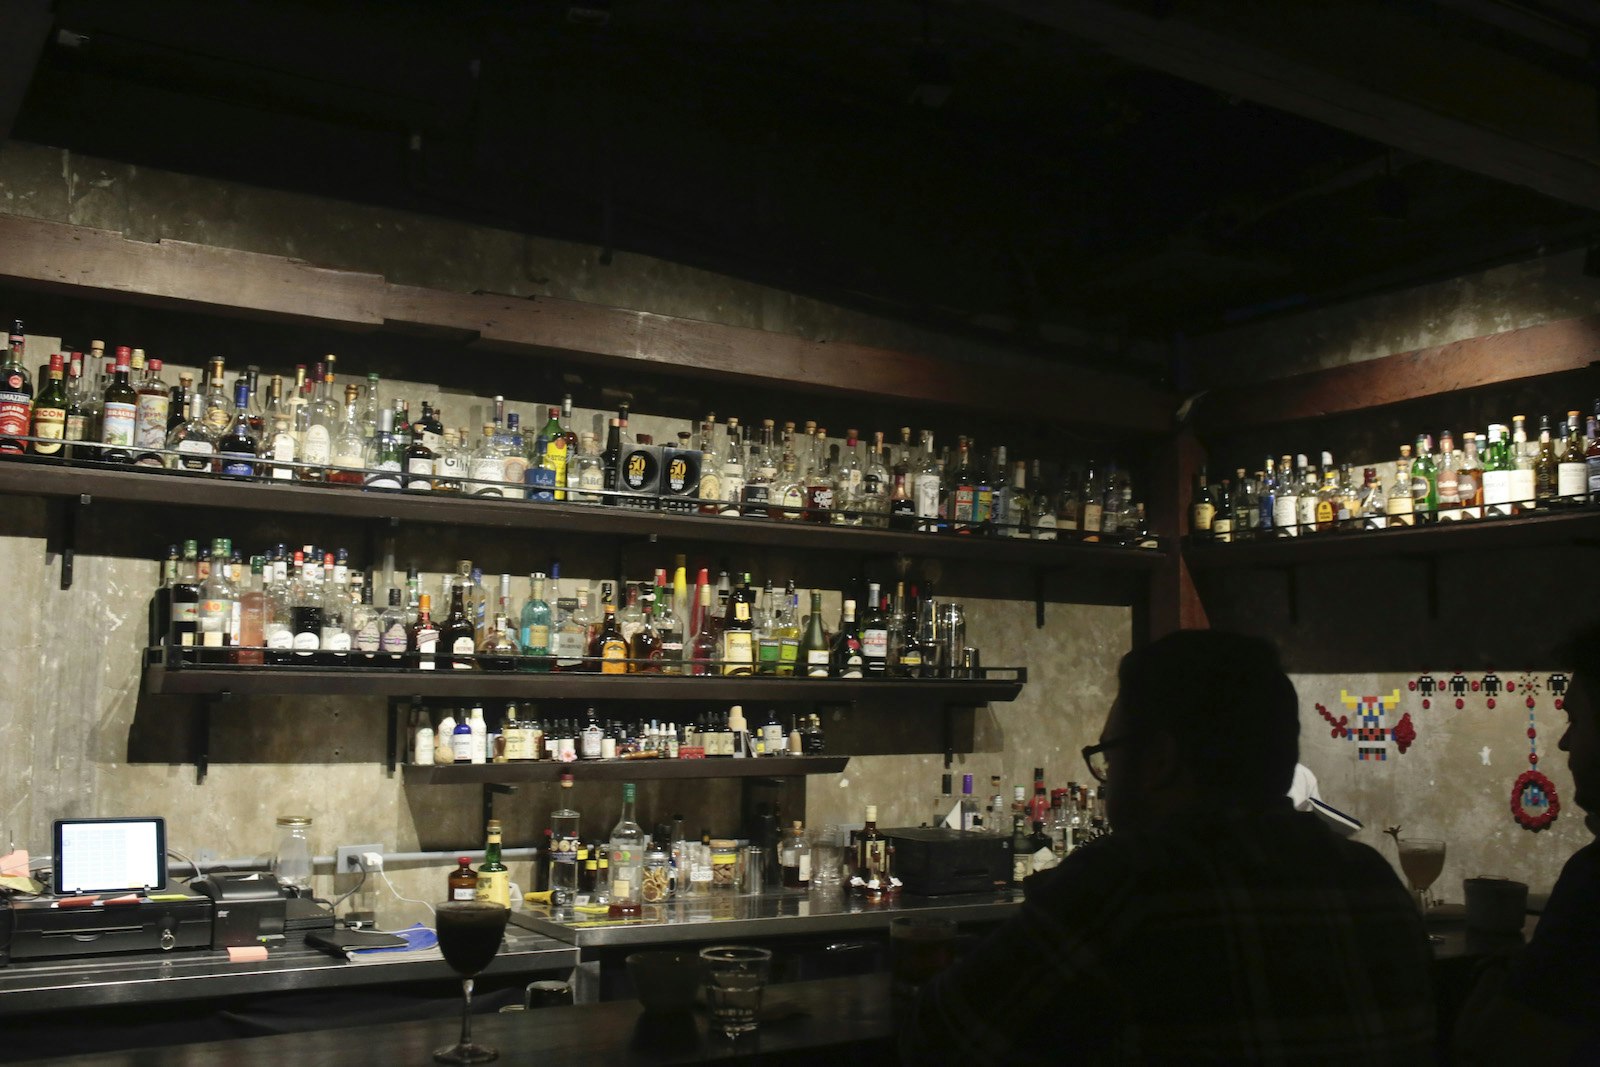 Dark room with a silhouette at the bar and three shelves of bottles behind the bar